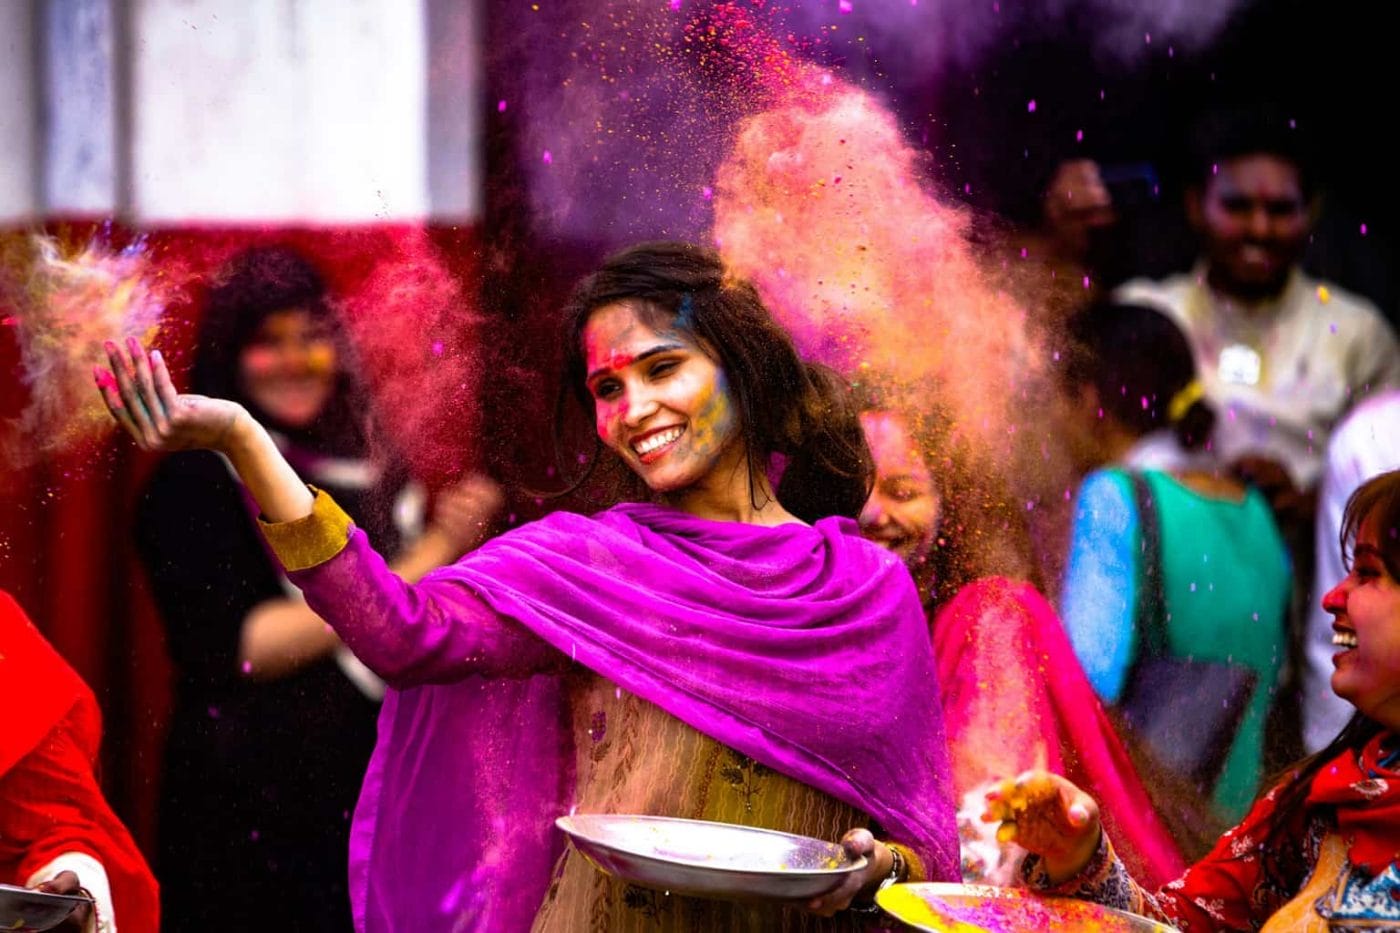 Lady in colorful clothes with spices in the air